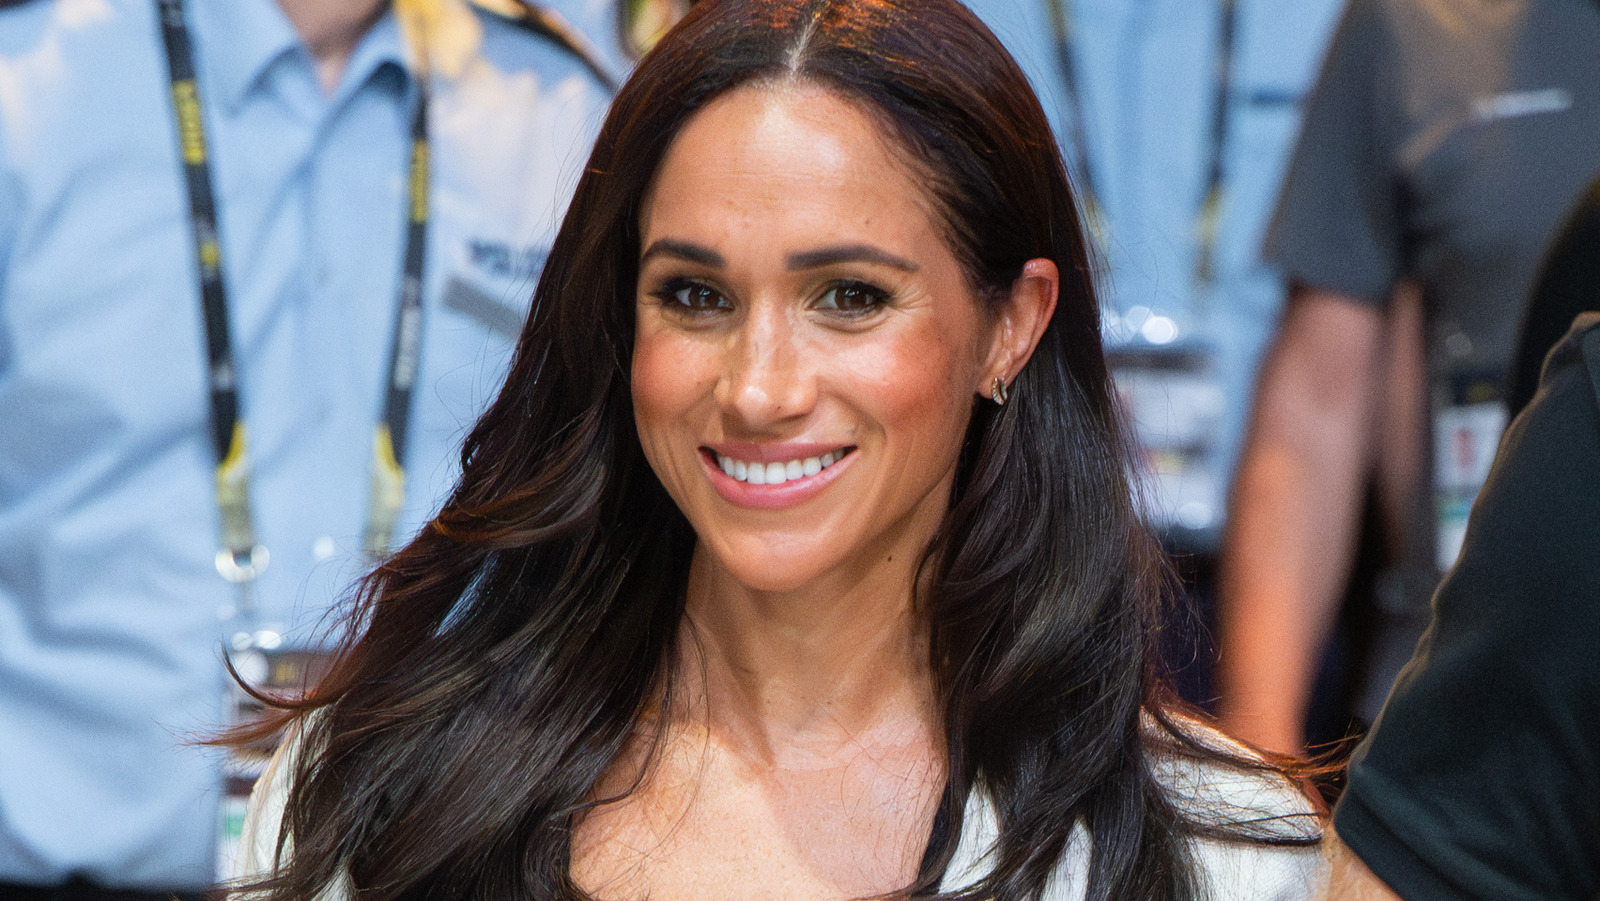 The Reason For Meghan Markle’s Late Arrival At The Invictus Games Is Now Clear – The List